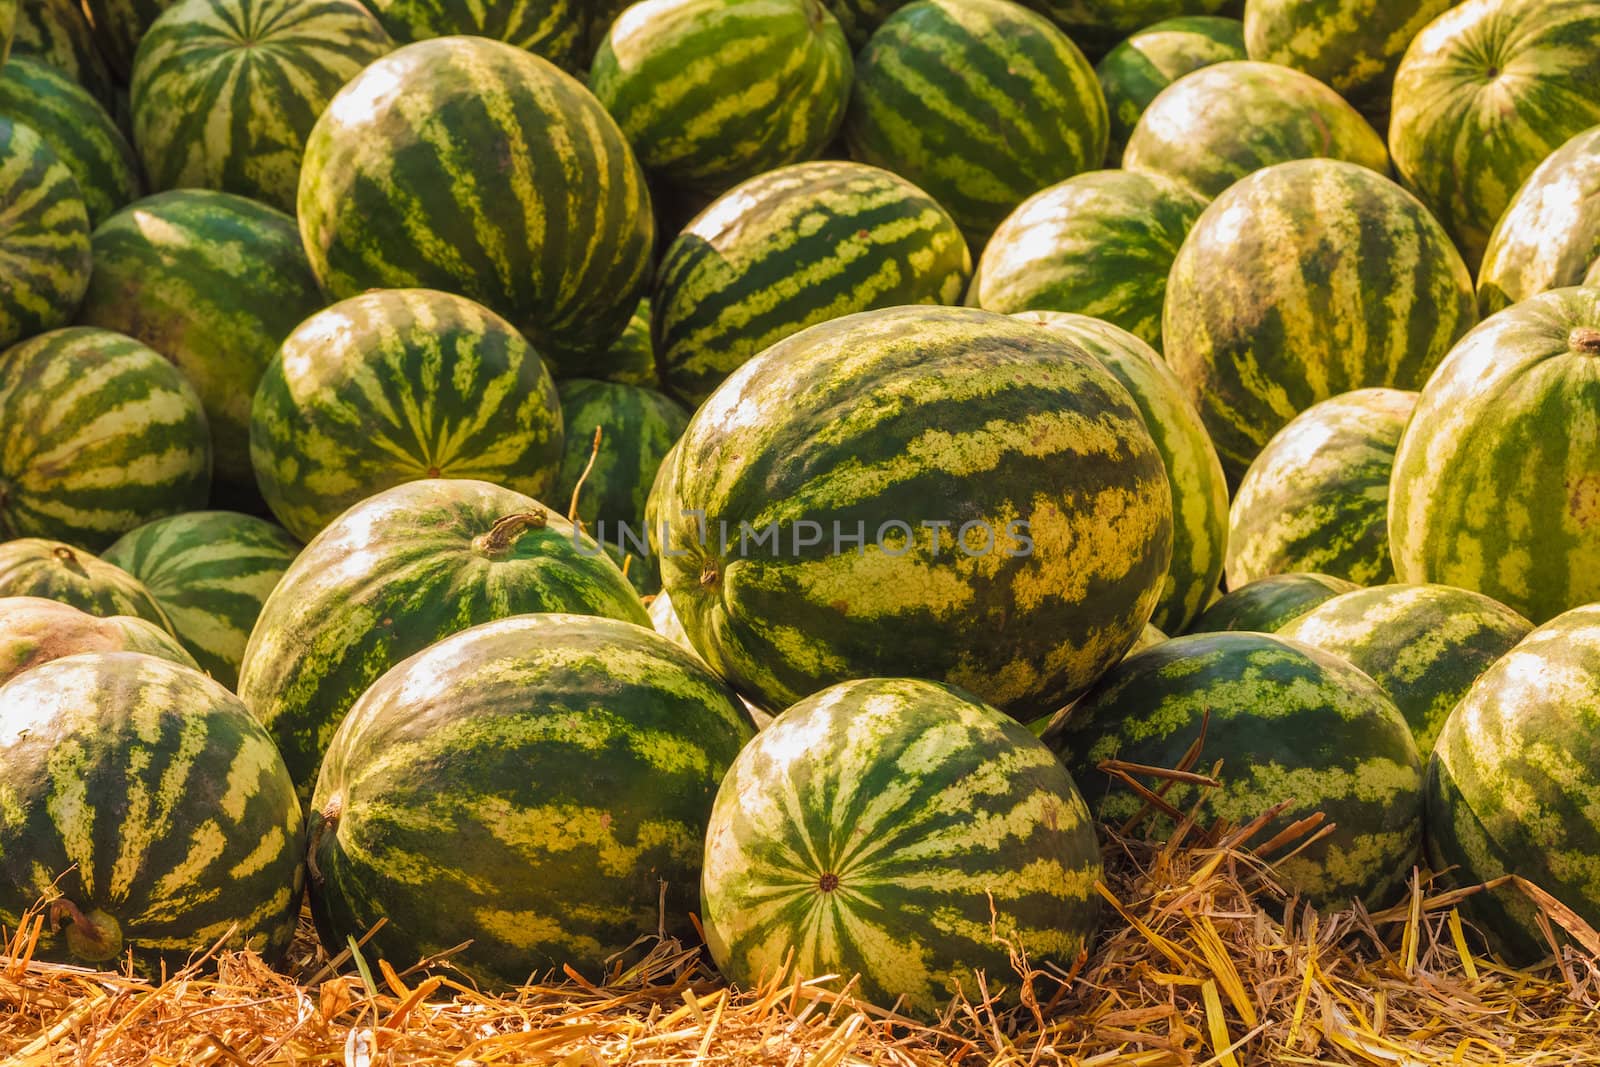 Watermelons were piled up by ryhor